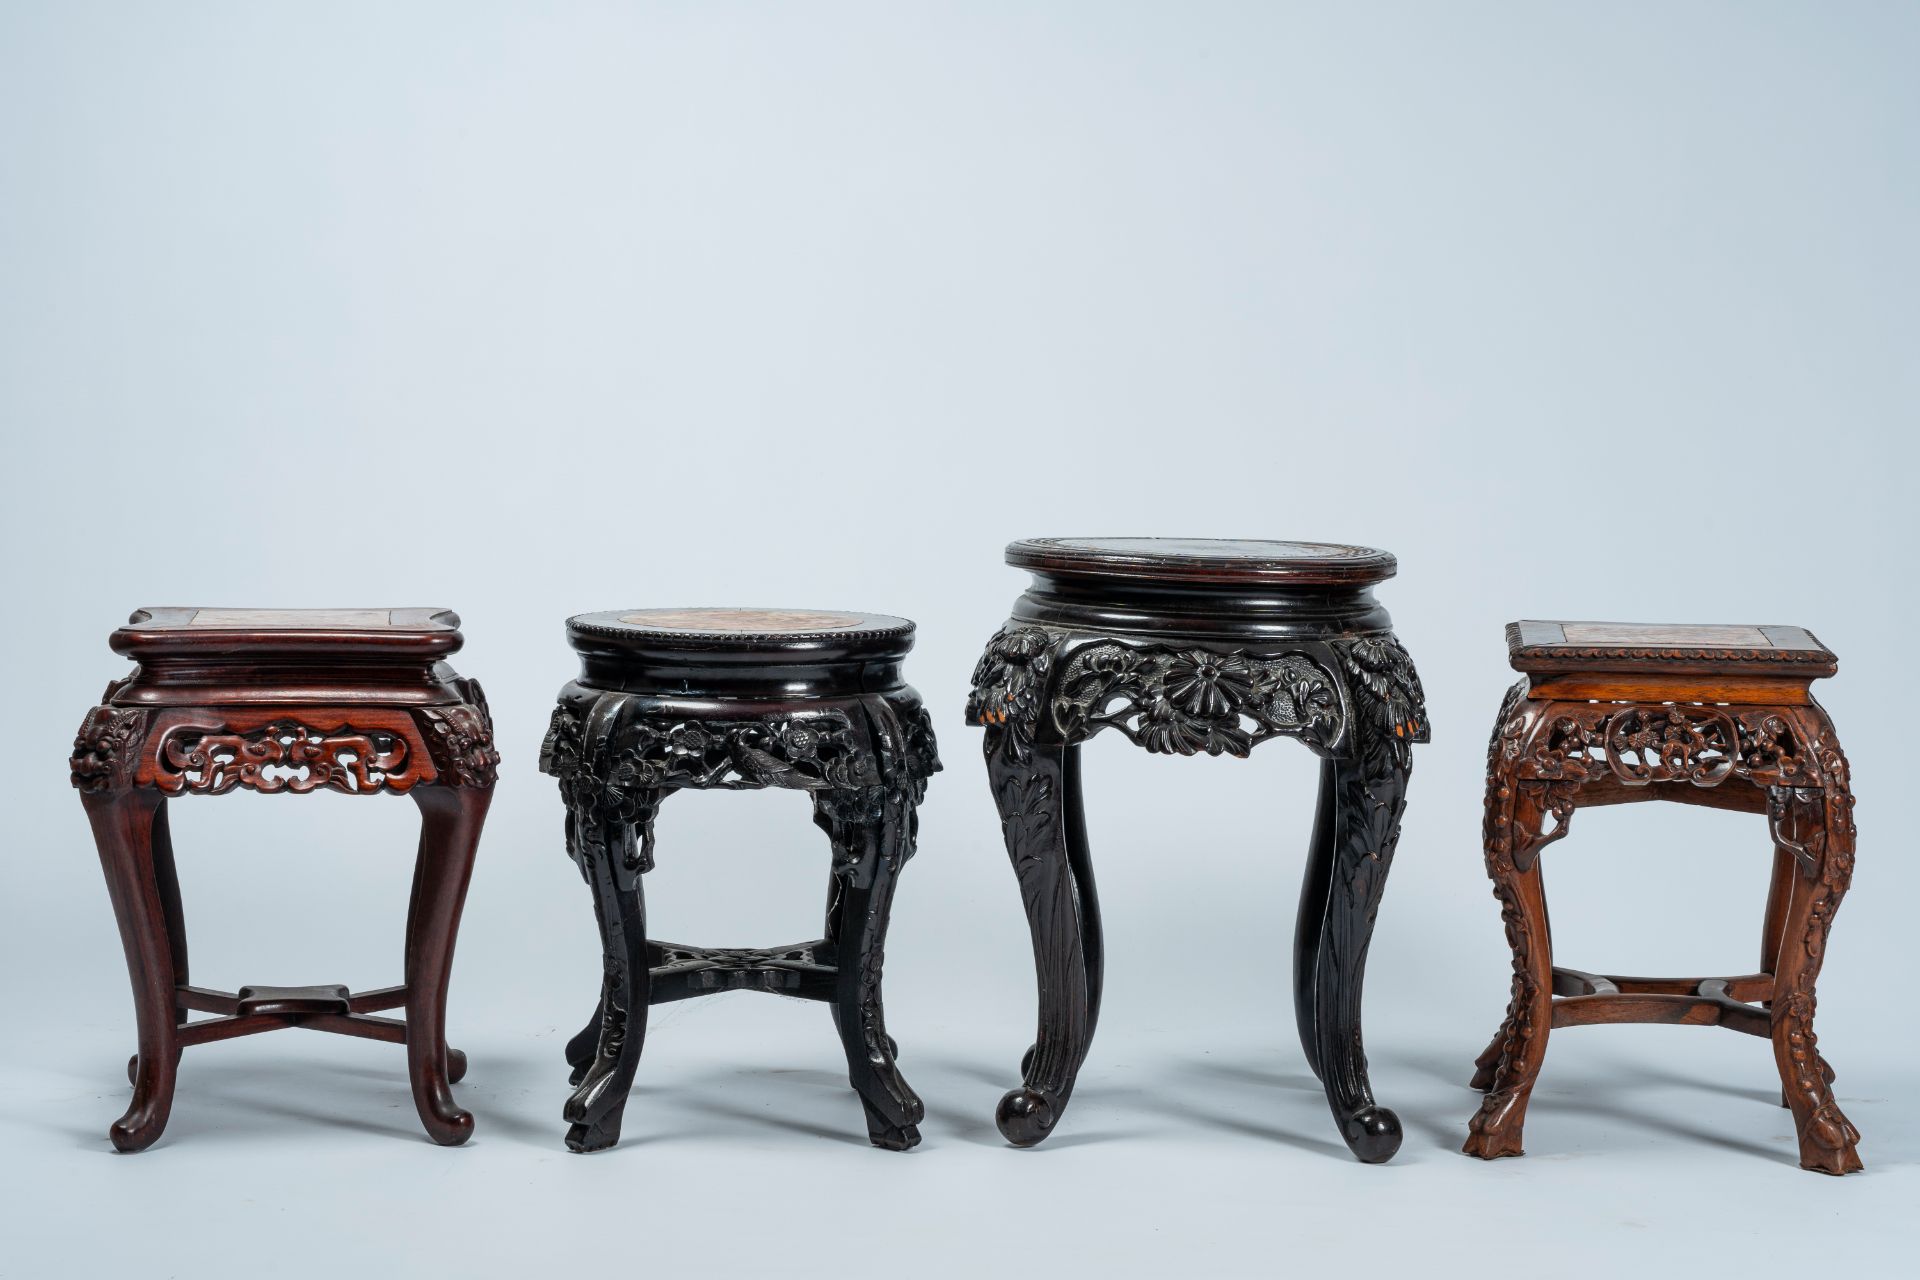 Four Chinese and Japanese open worked carved wood stands with marble and wood top, 20th C. - Image 2 of 7